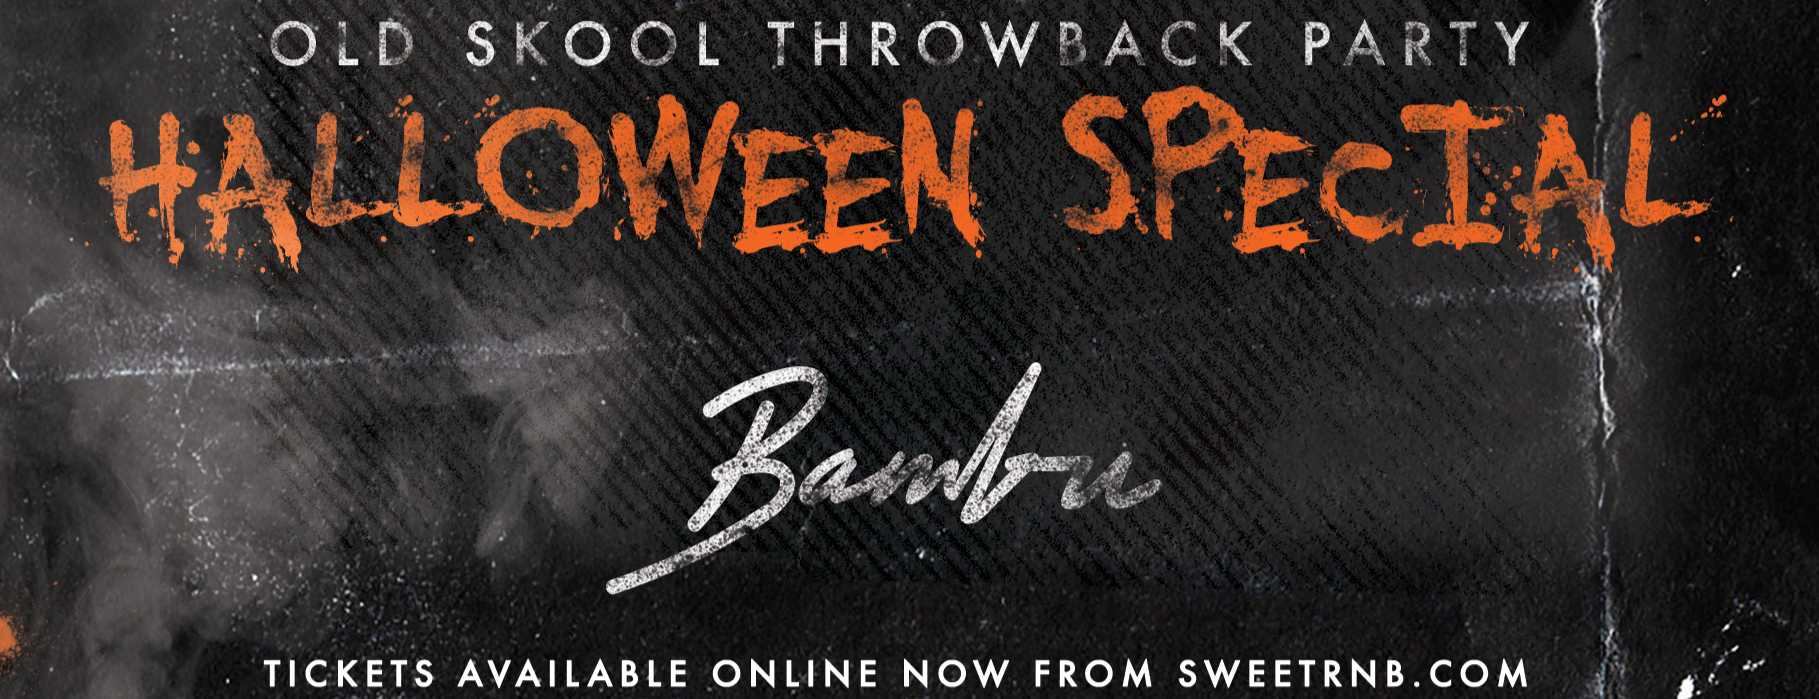 Old Skool Throwback Party - Halloween Special